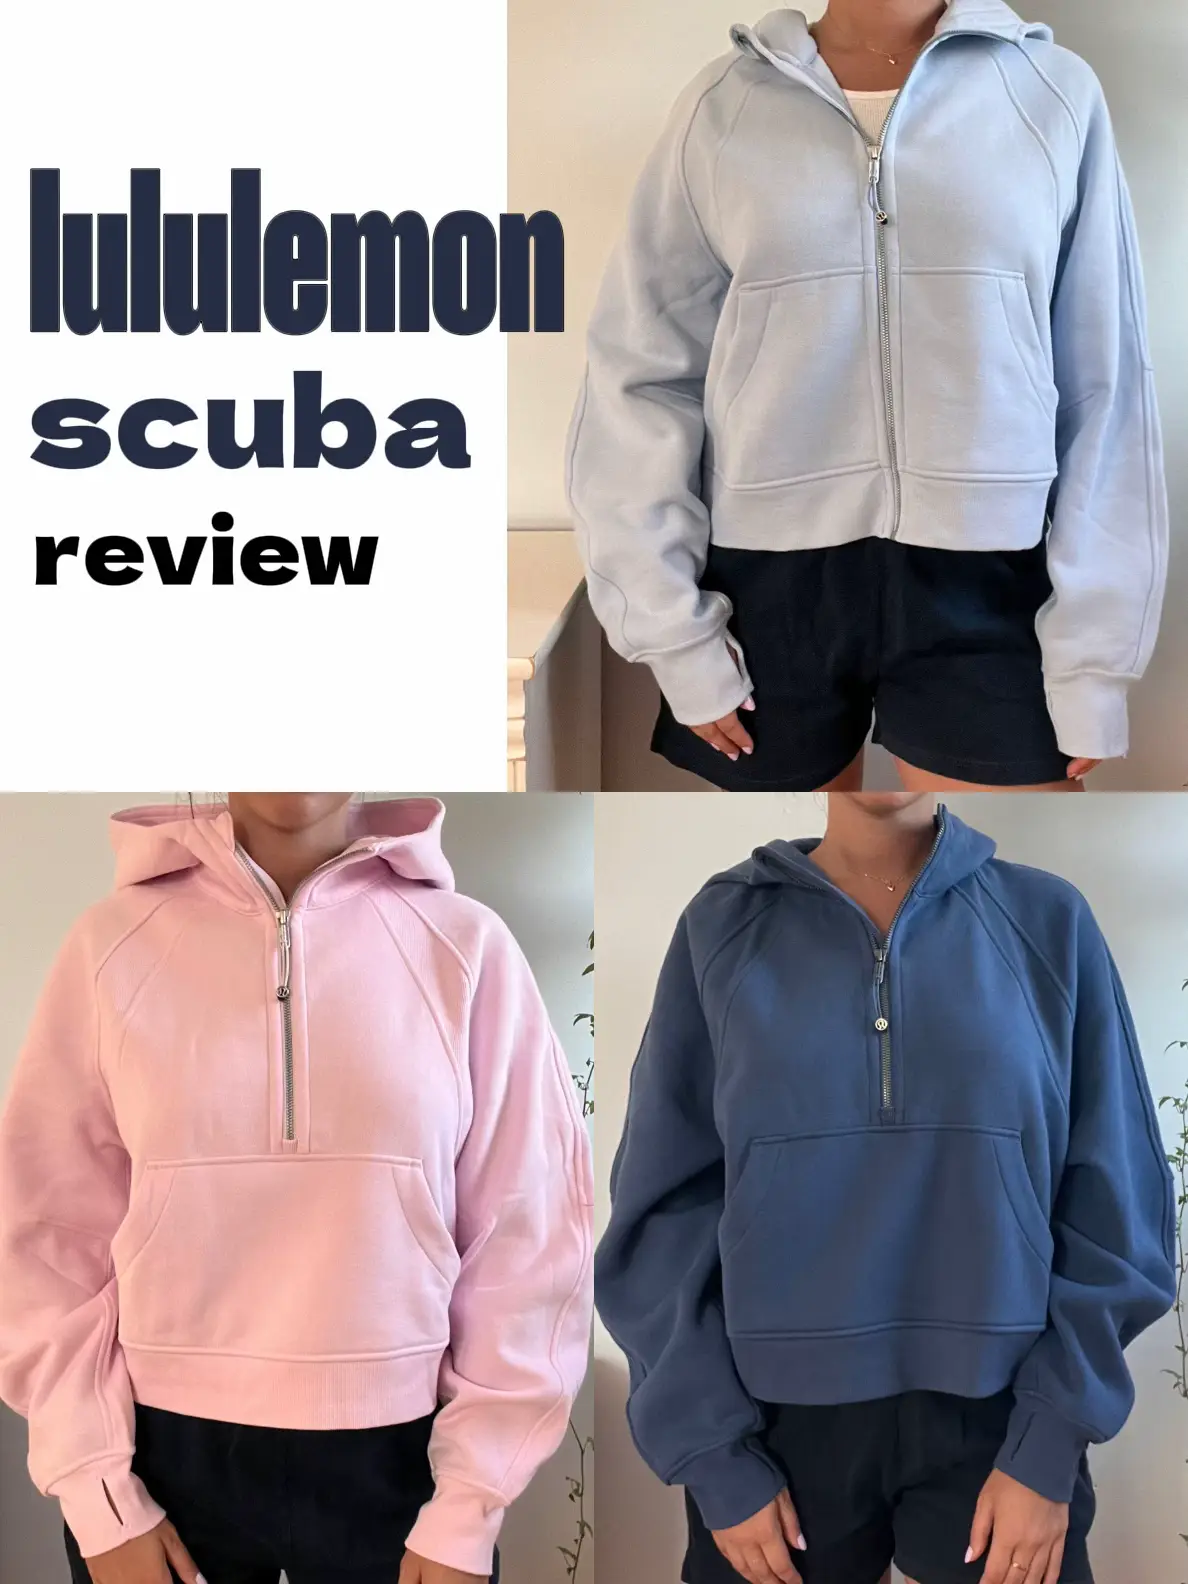 I bring thee another Lululemon dupe from . 😜 This jacket from   ($48) is a dead match to the lululemon scuba hoodie which